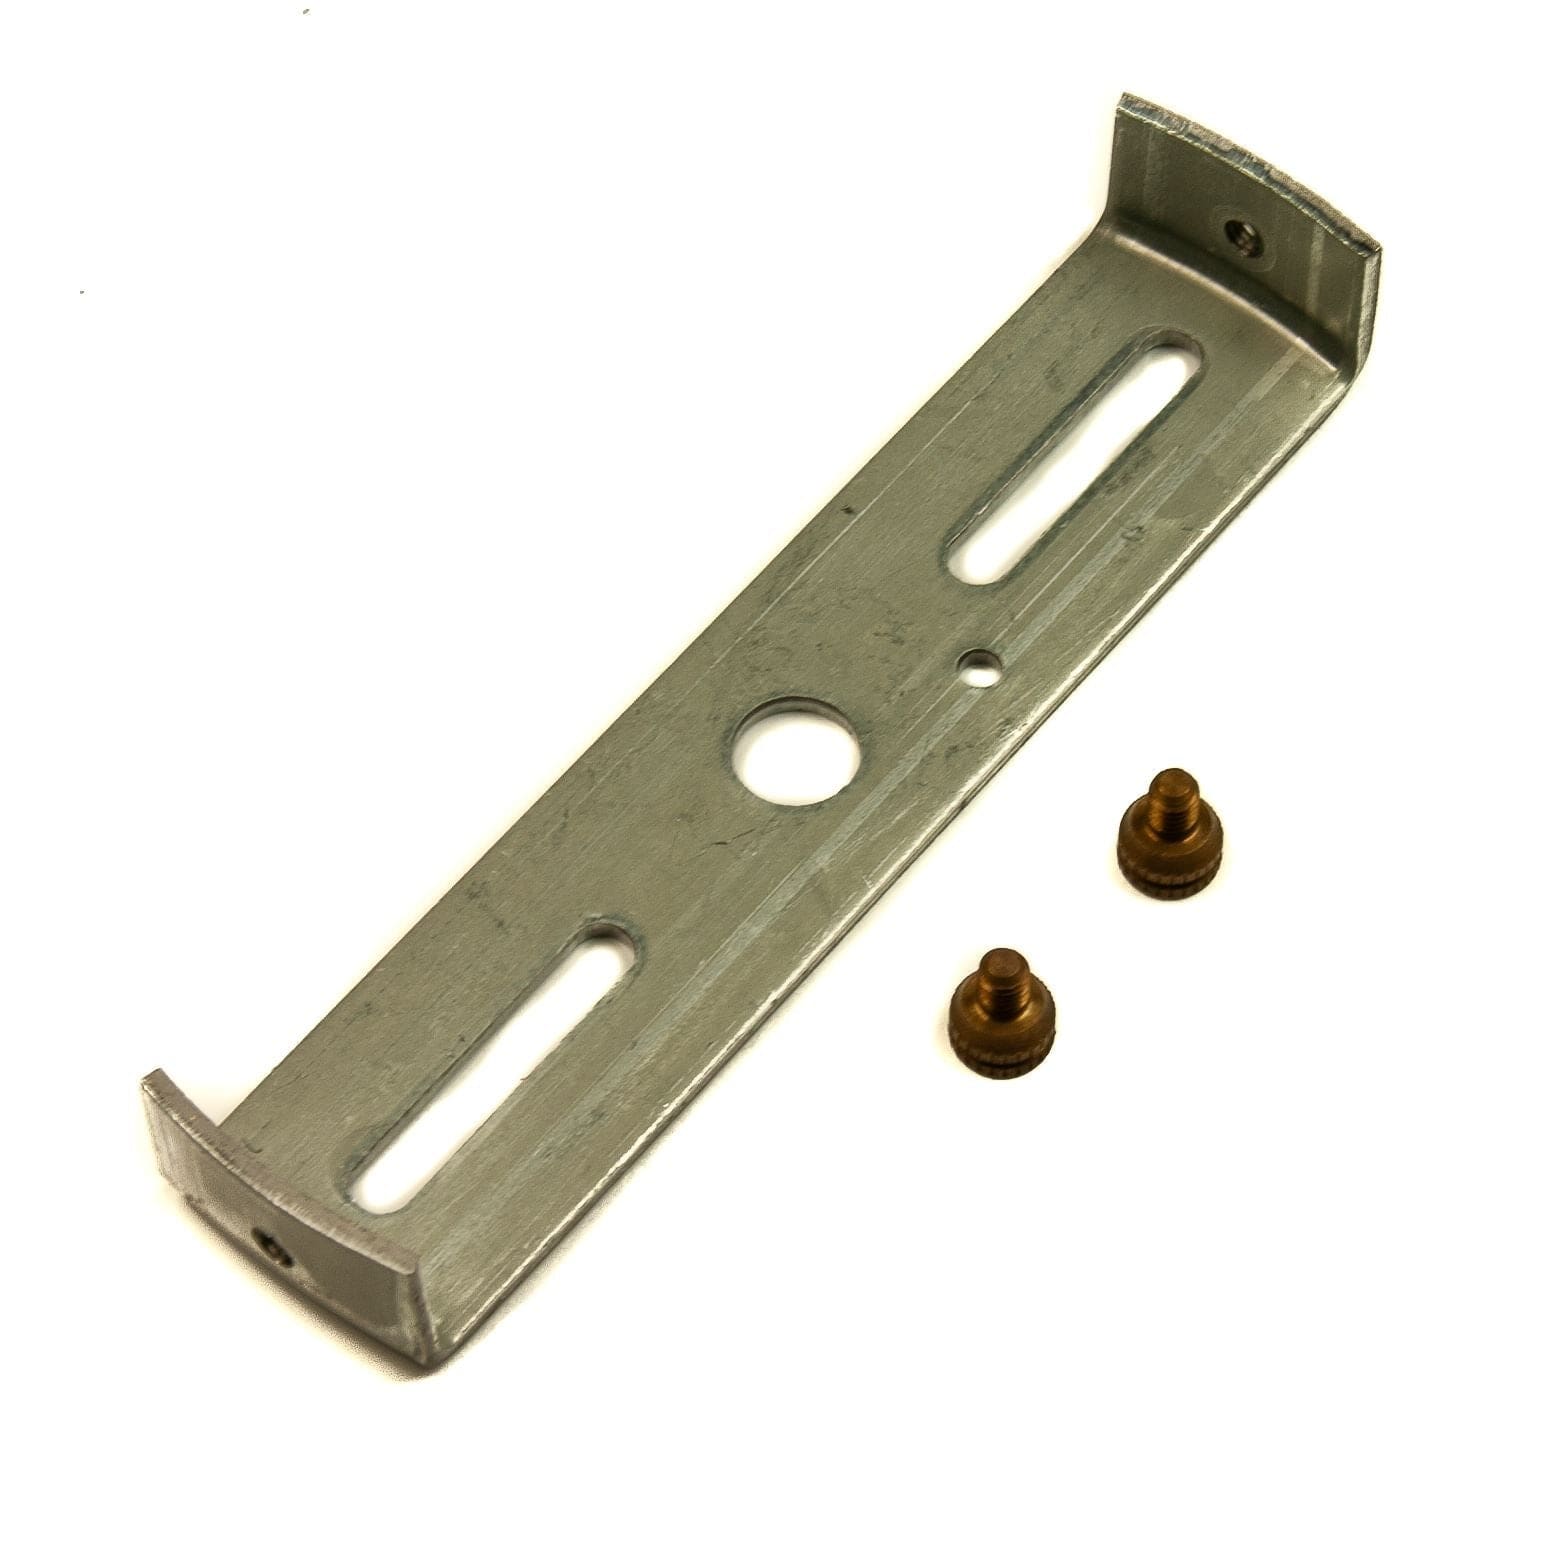 Lighting Fixture Ceiling Plate Bracket Suspension Plate 120mm with Old English Screws - Thunderfix Hardware